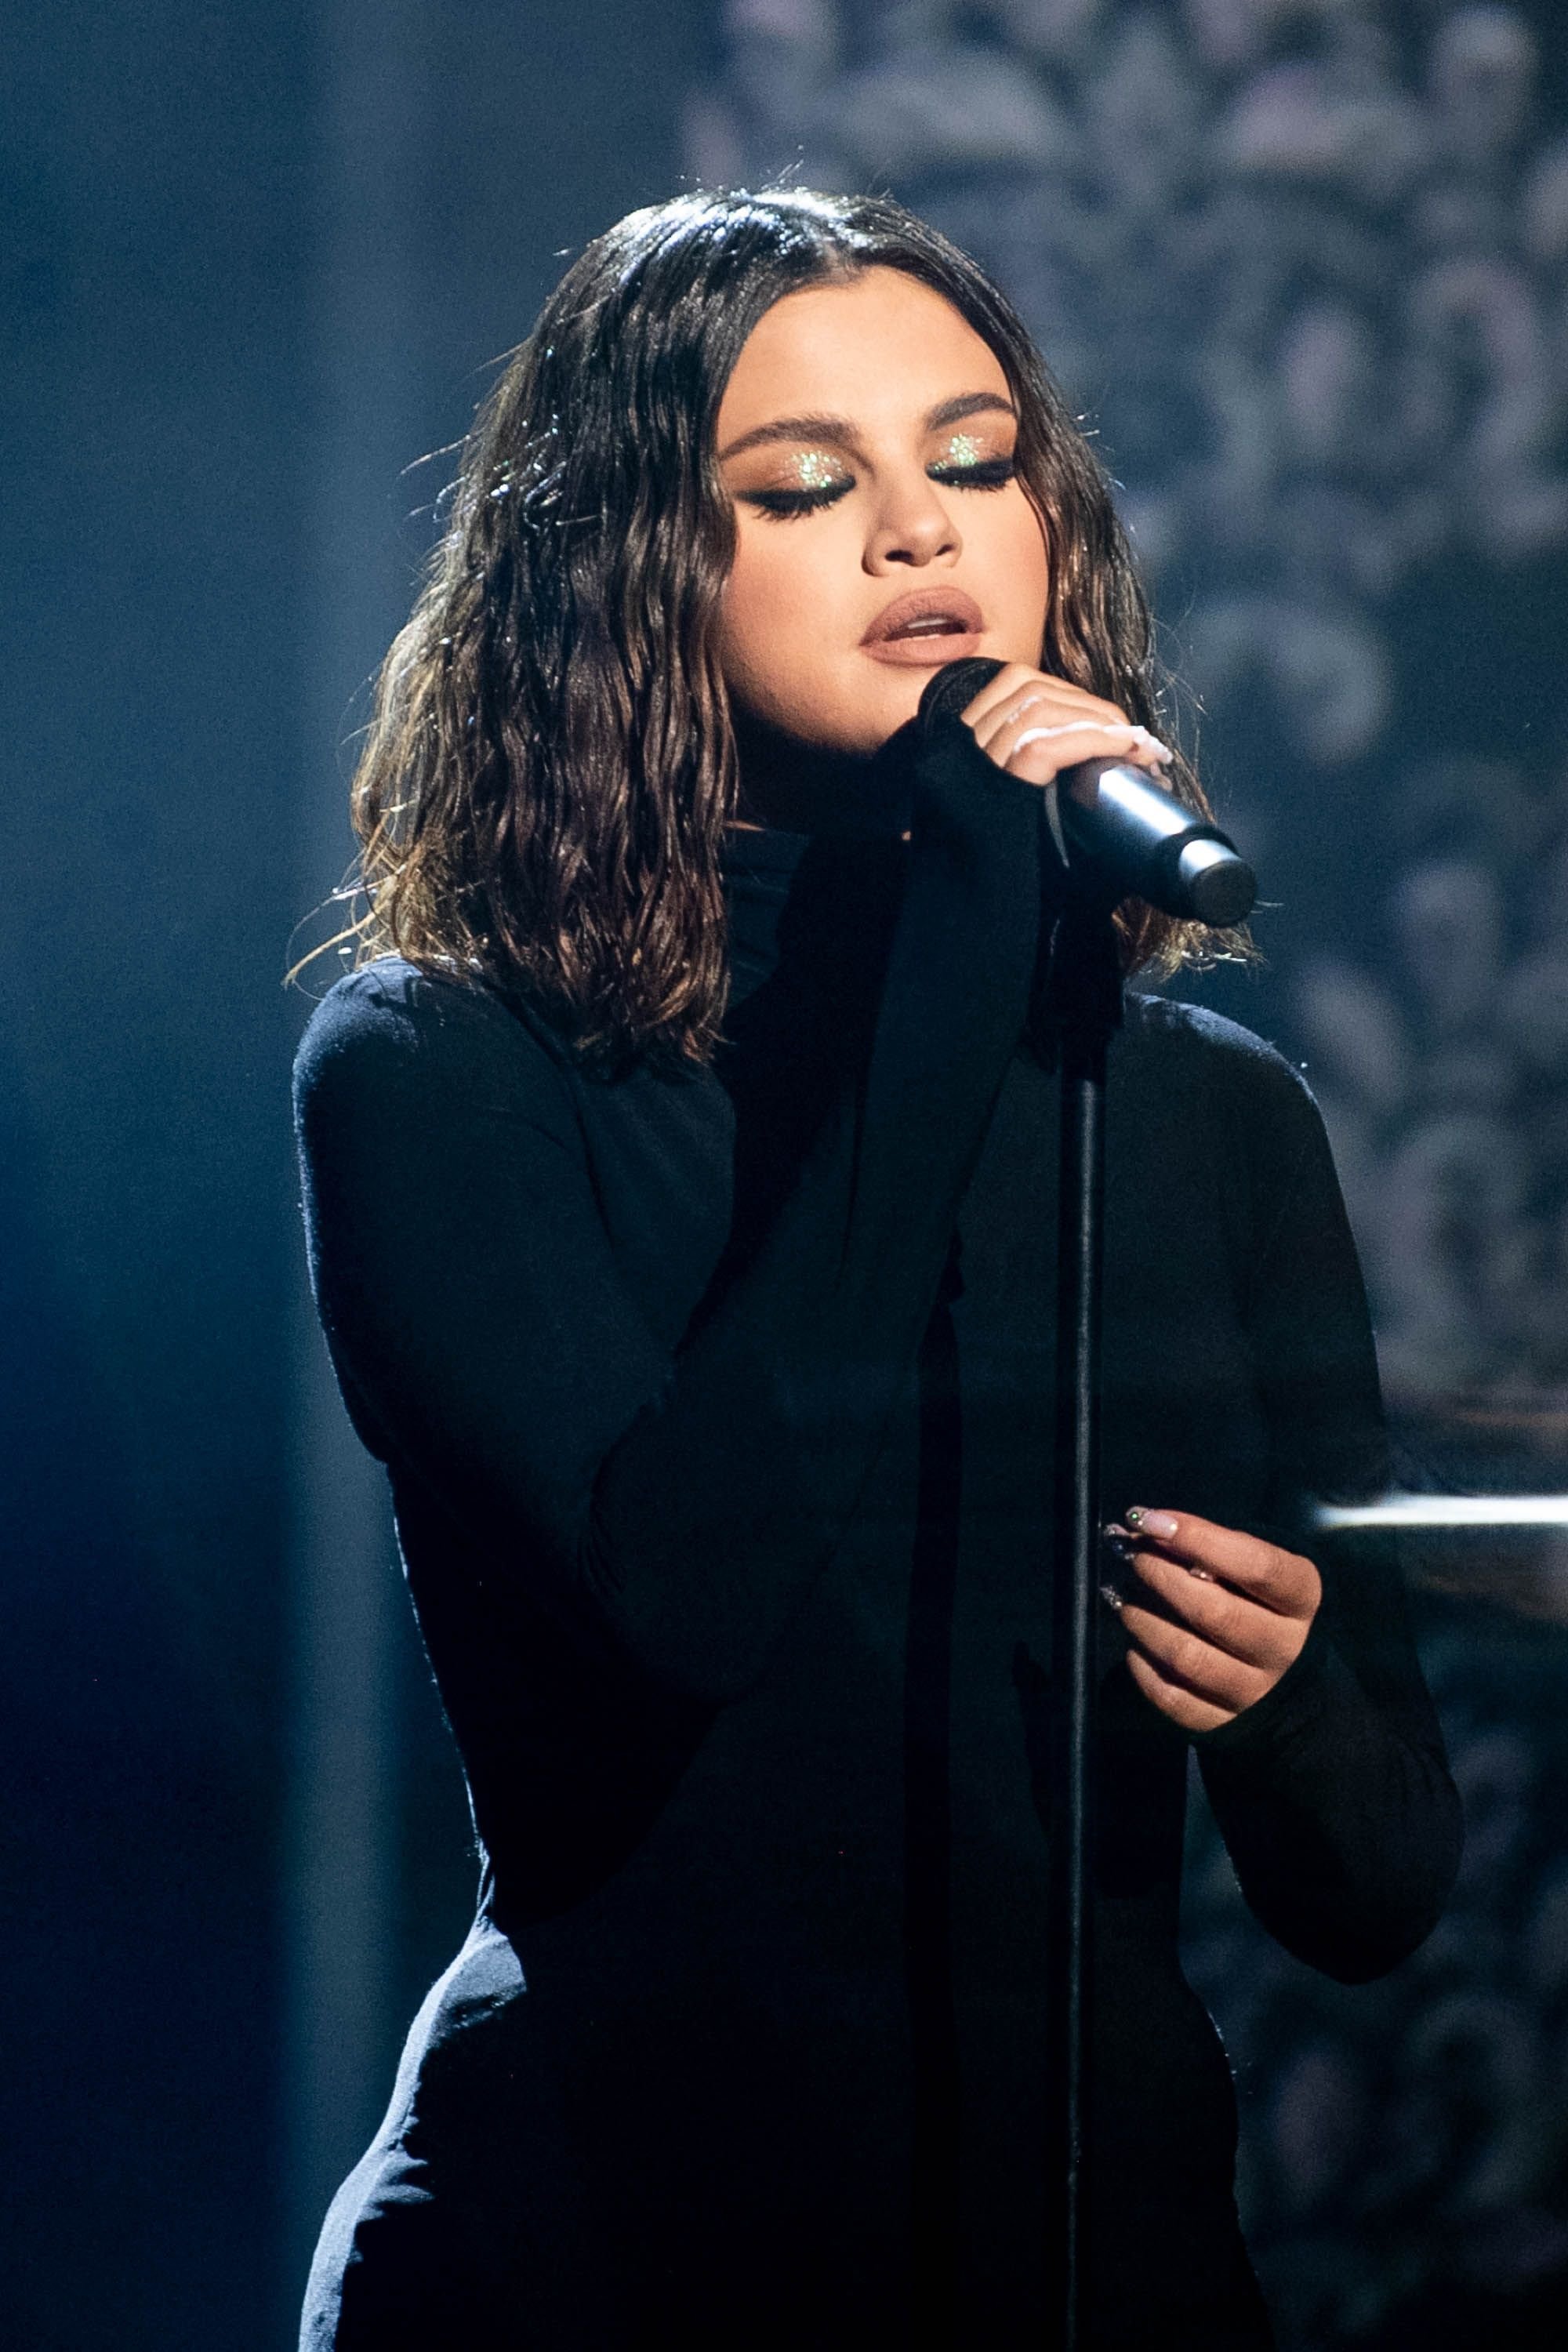 Selena Gomez at the 2019 American Music Awards at Microsoft Theater on November 24, 2019 in Los Angeles, California | Photo: Getty Images